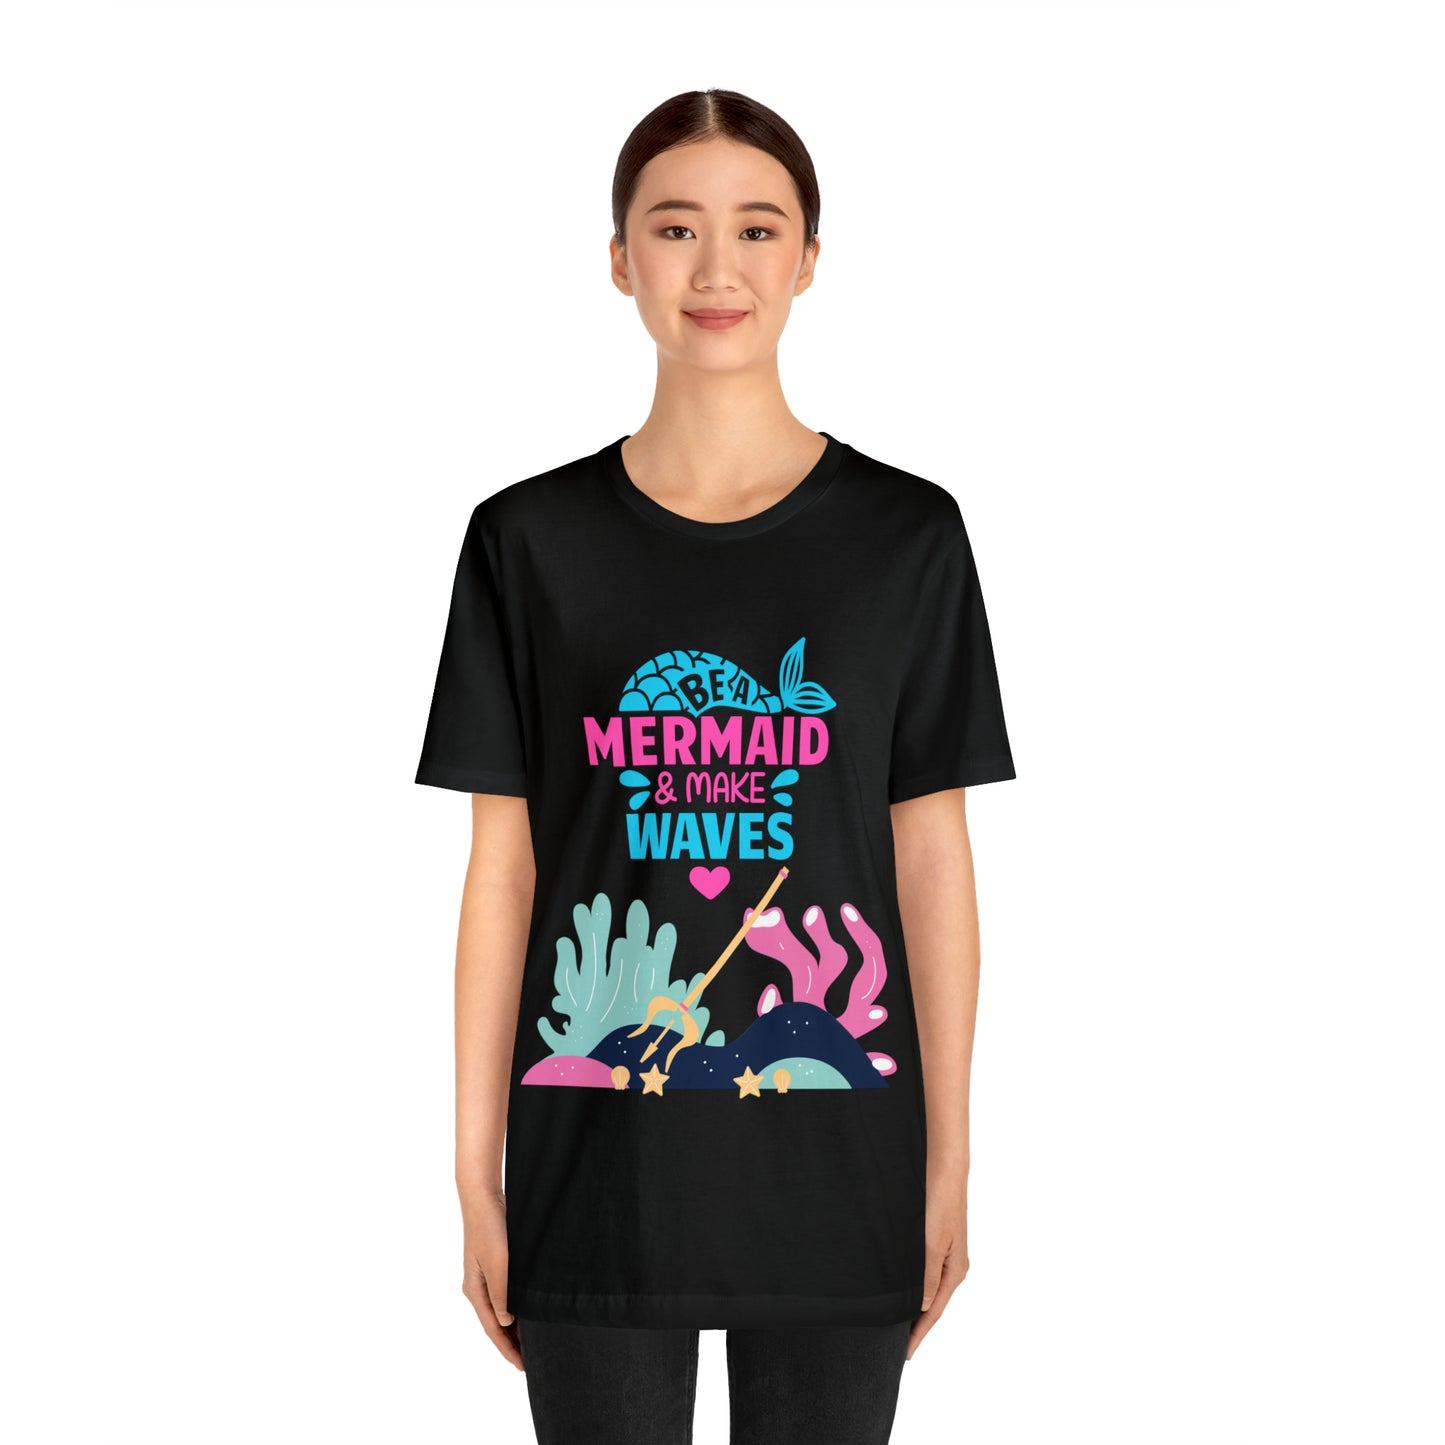 Mermaid T-Shirt - Unisex jersey tee with an enchanting design, soft cotton fabric, and ribbed knit collars, perfect for mermaid enthusiasts and lovers of mermaid-inspired clothing.Coral inspired